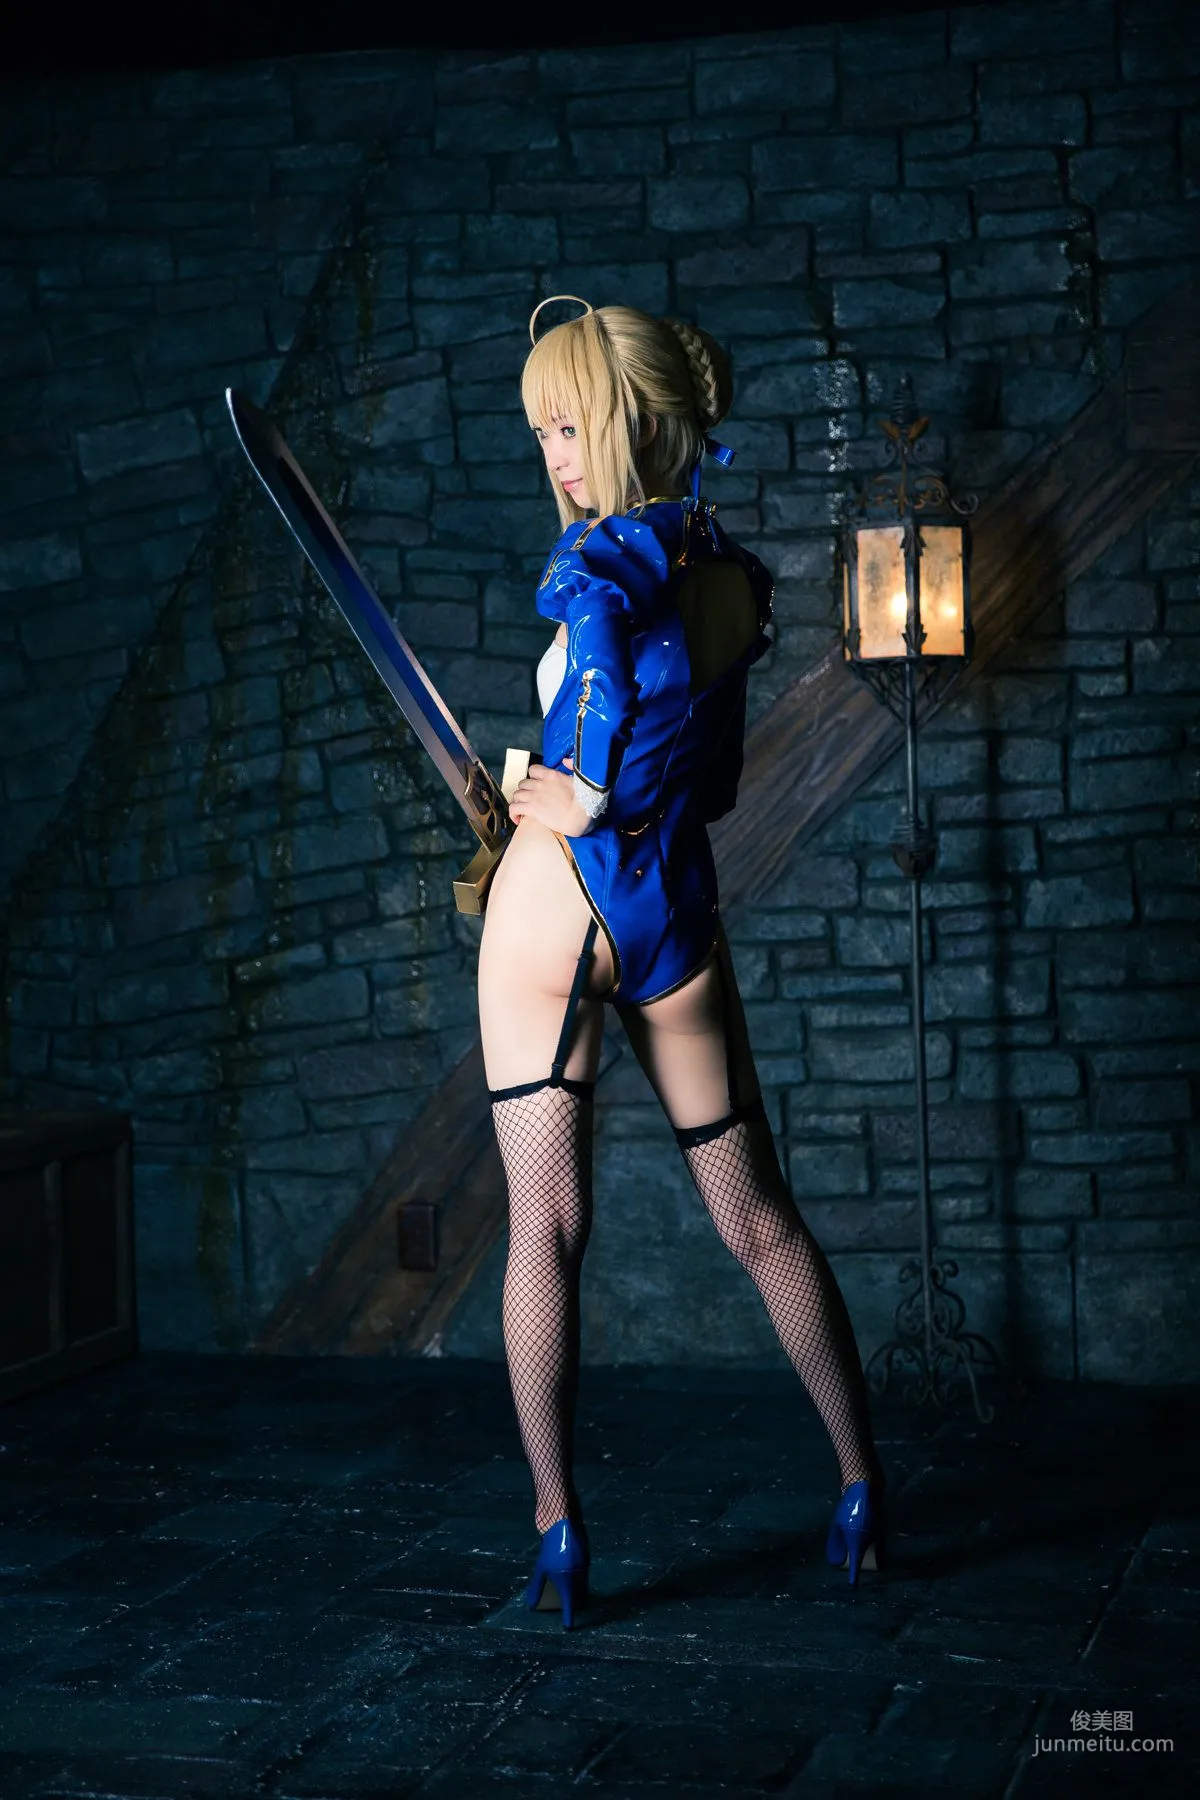 Mike(ミケ) 《Fate stay night》Saber [Mikehouse] 写真集4